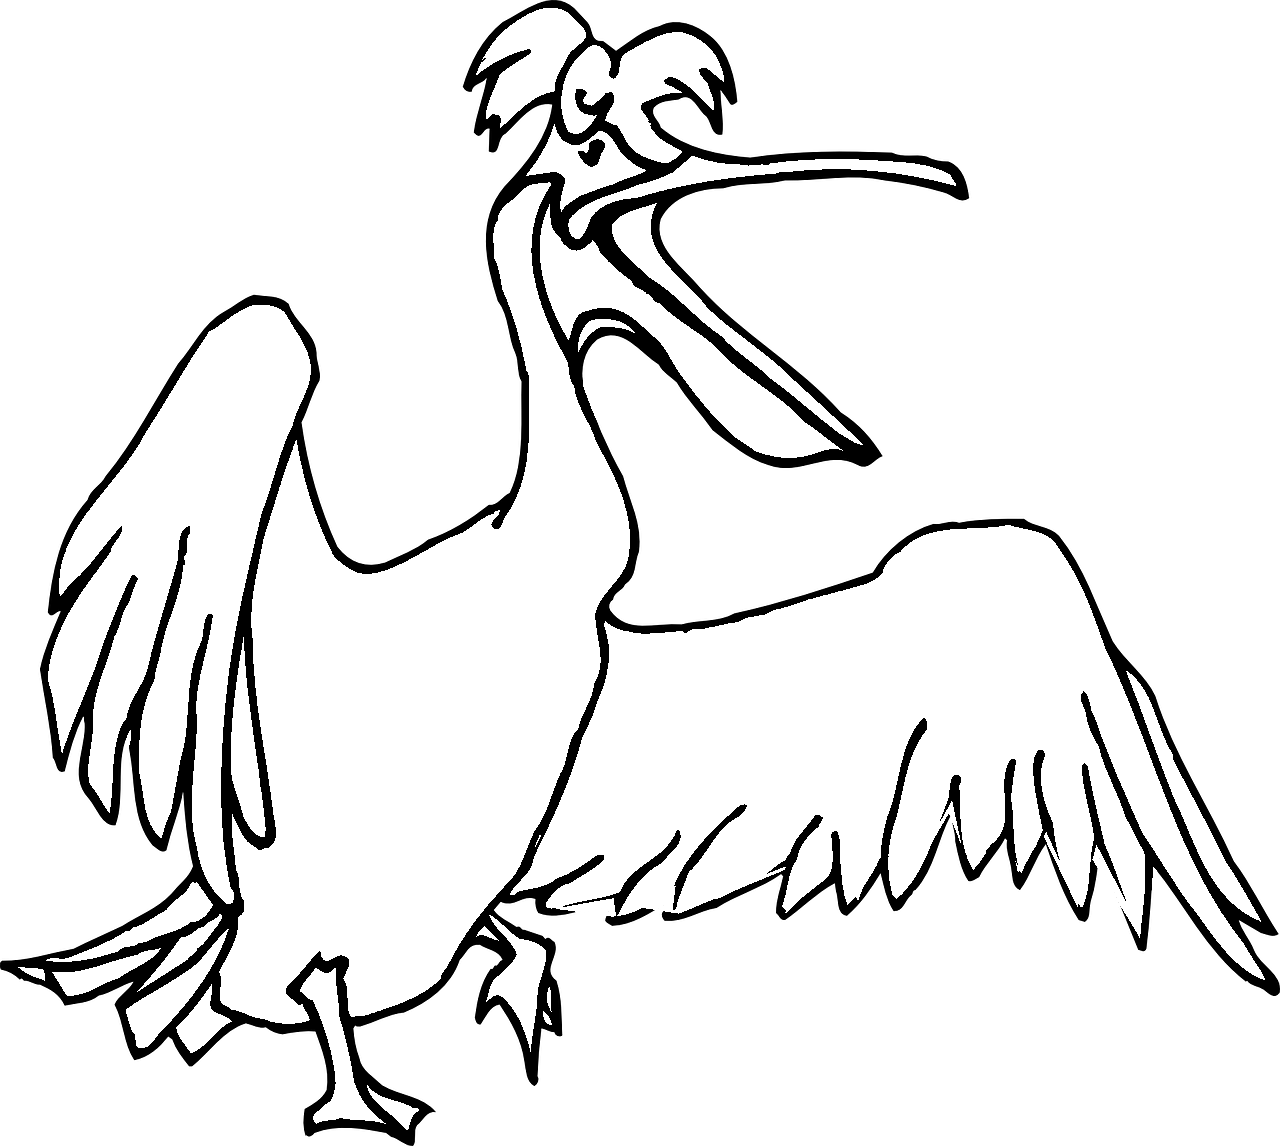 Coloring page of a pelican